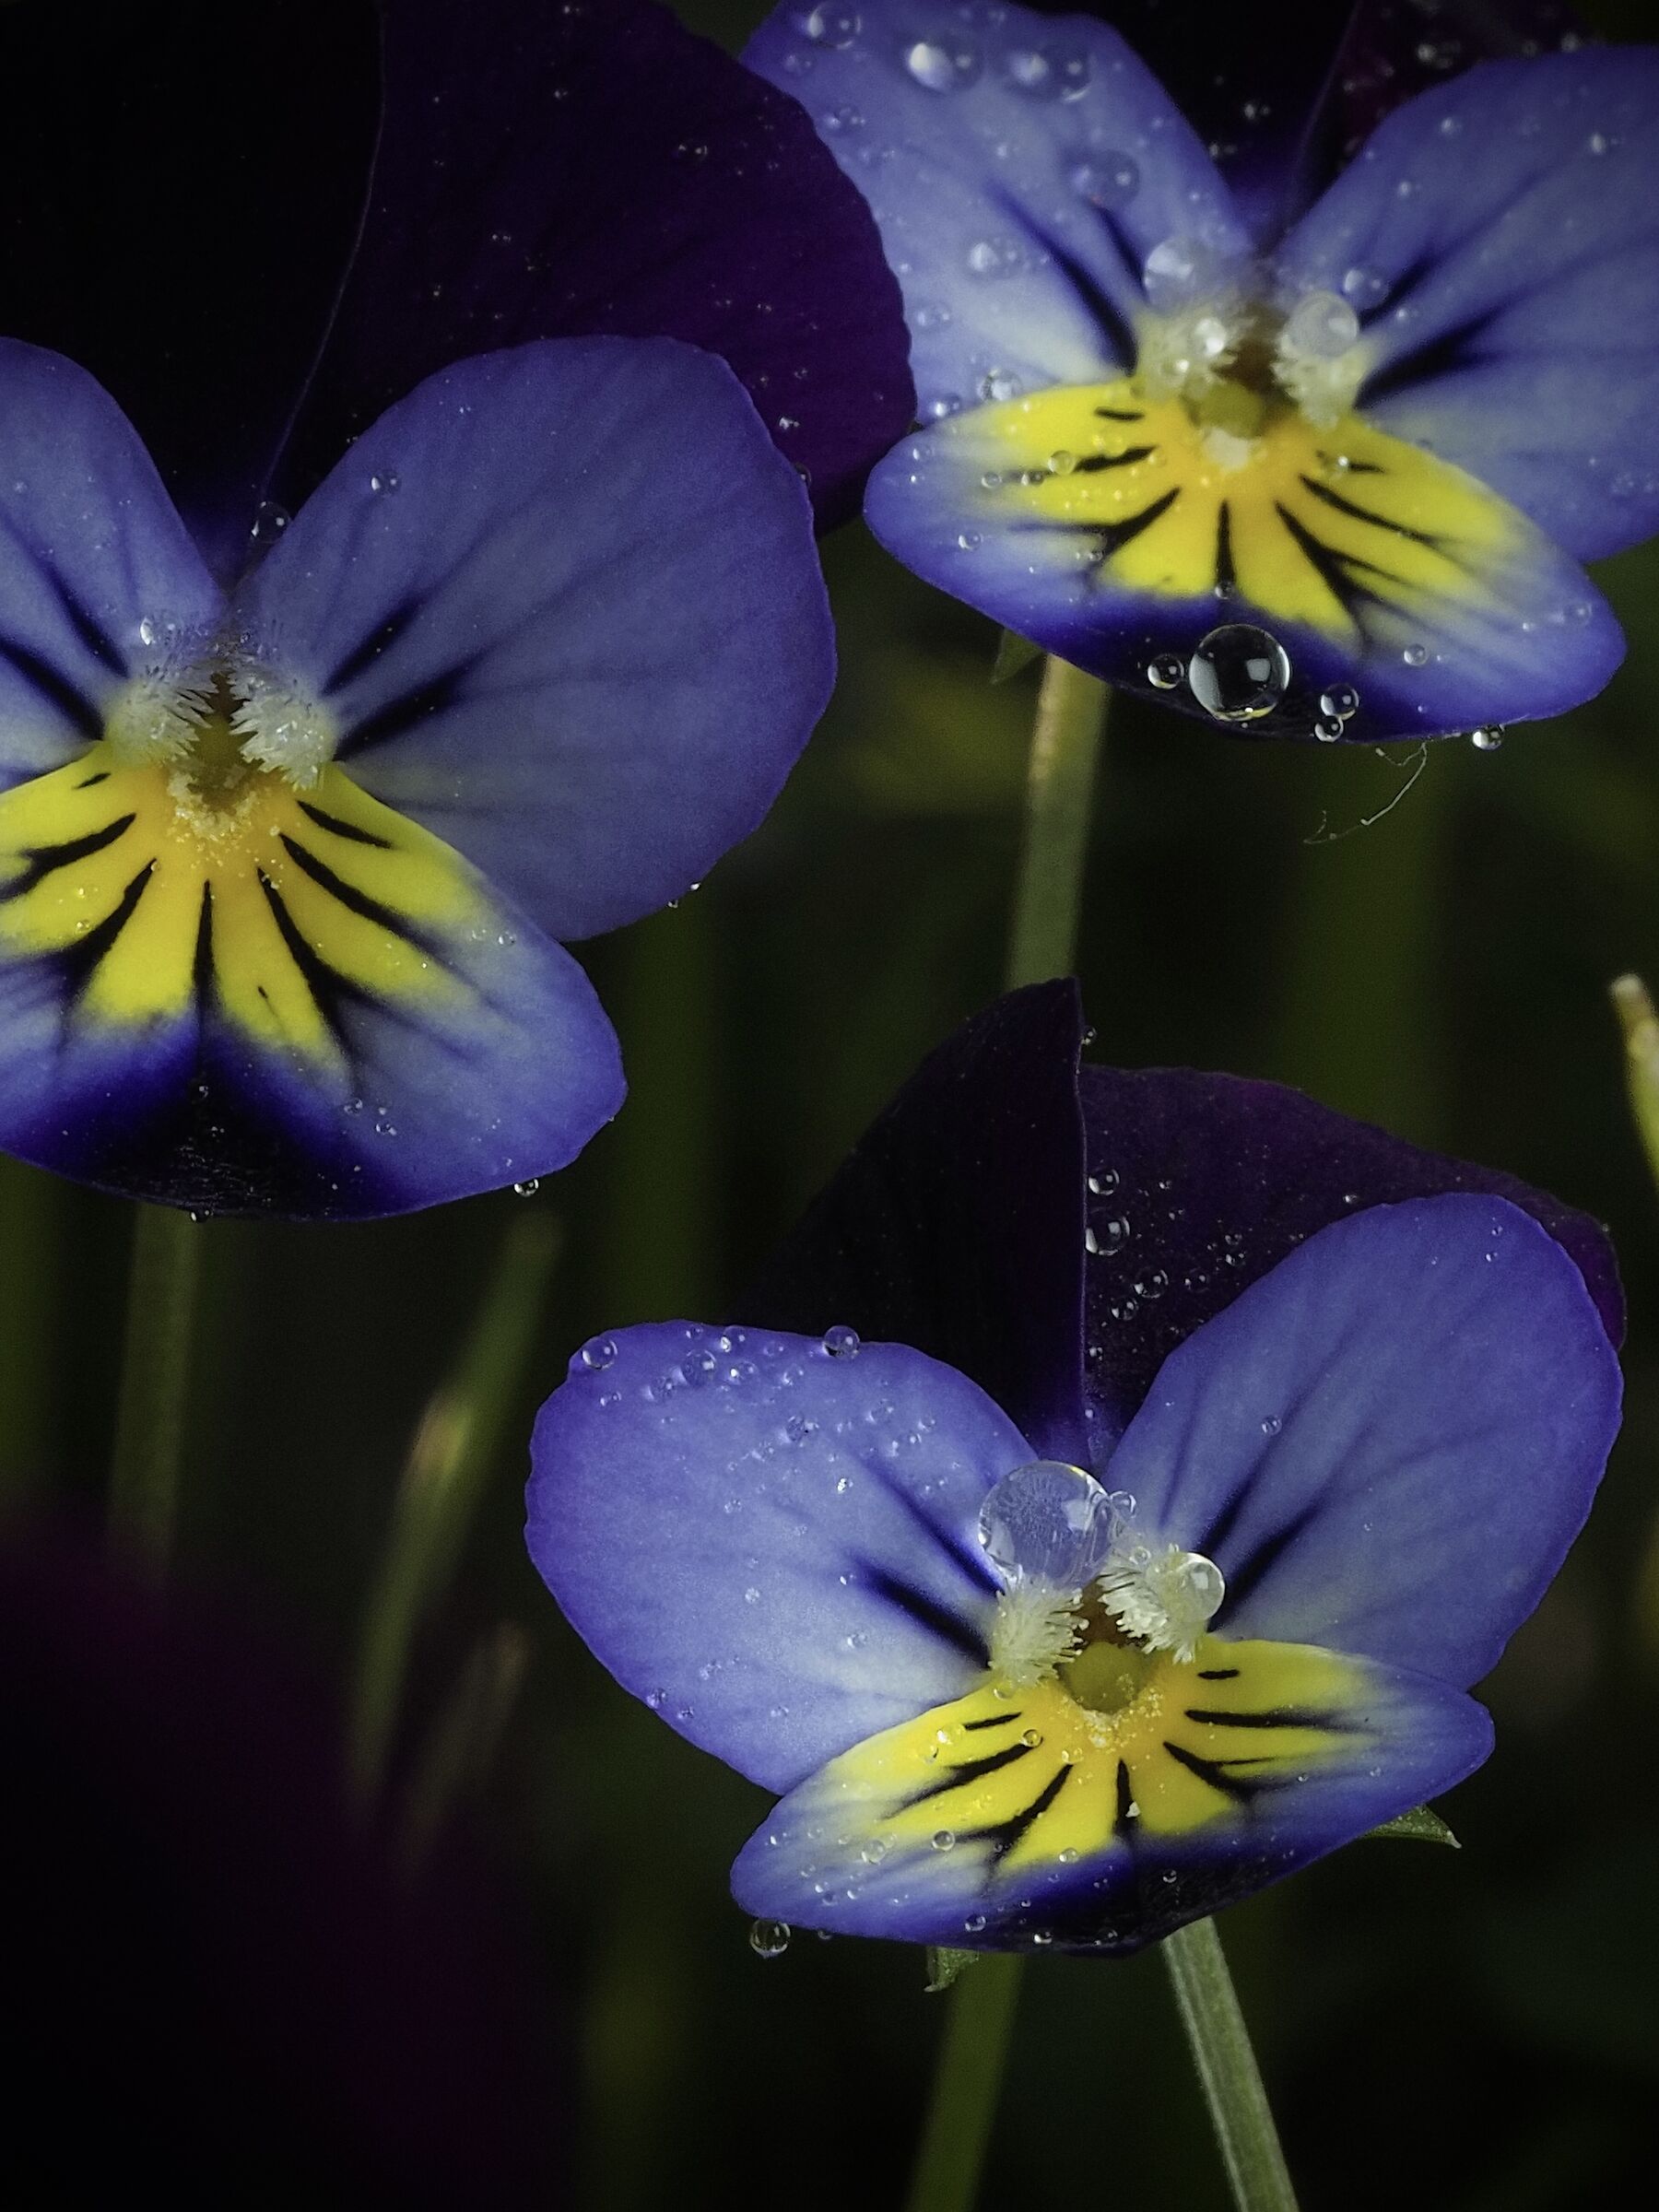 The trio of violets...